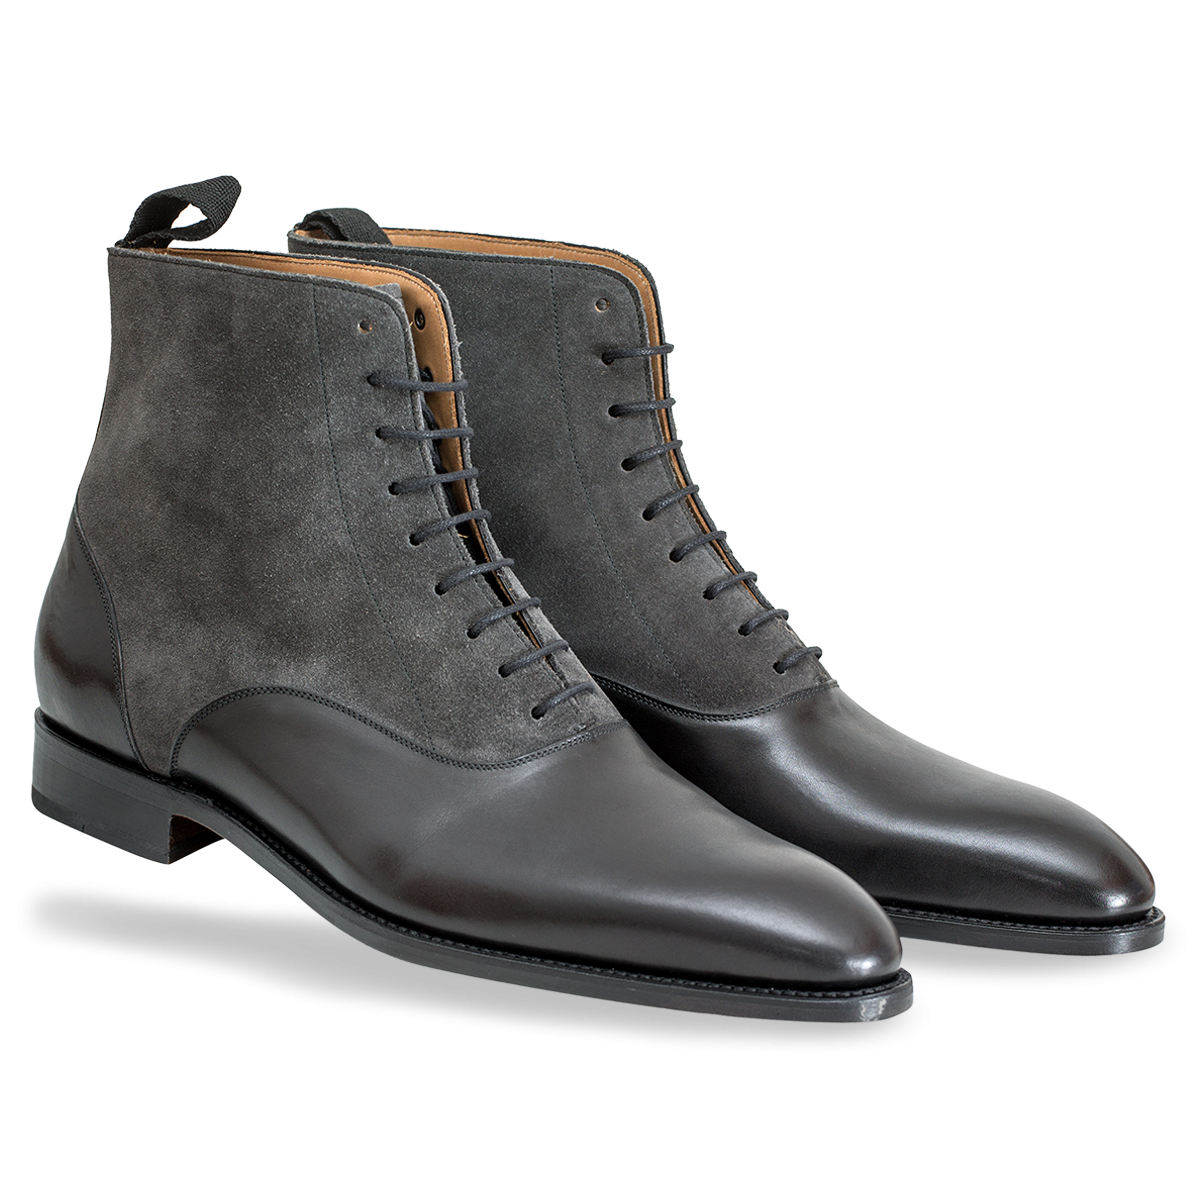 S l1600 | Grey suede boots, Suede leather boots, Boots men